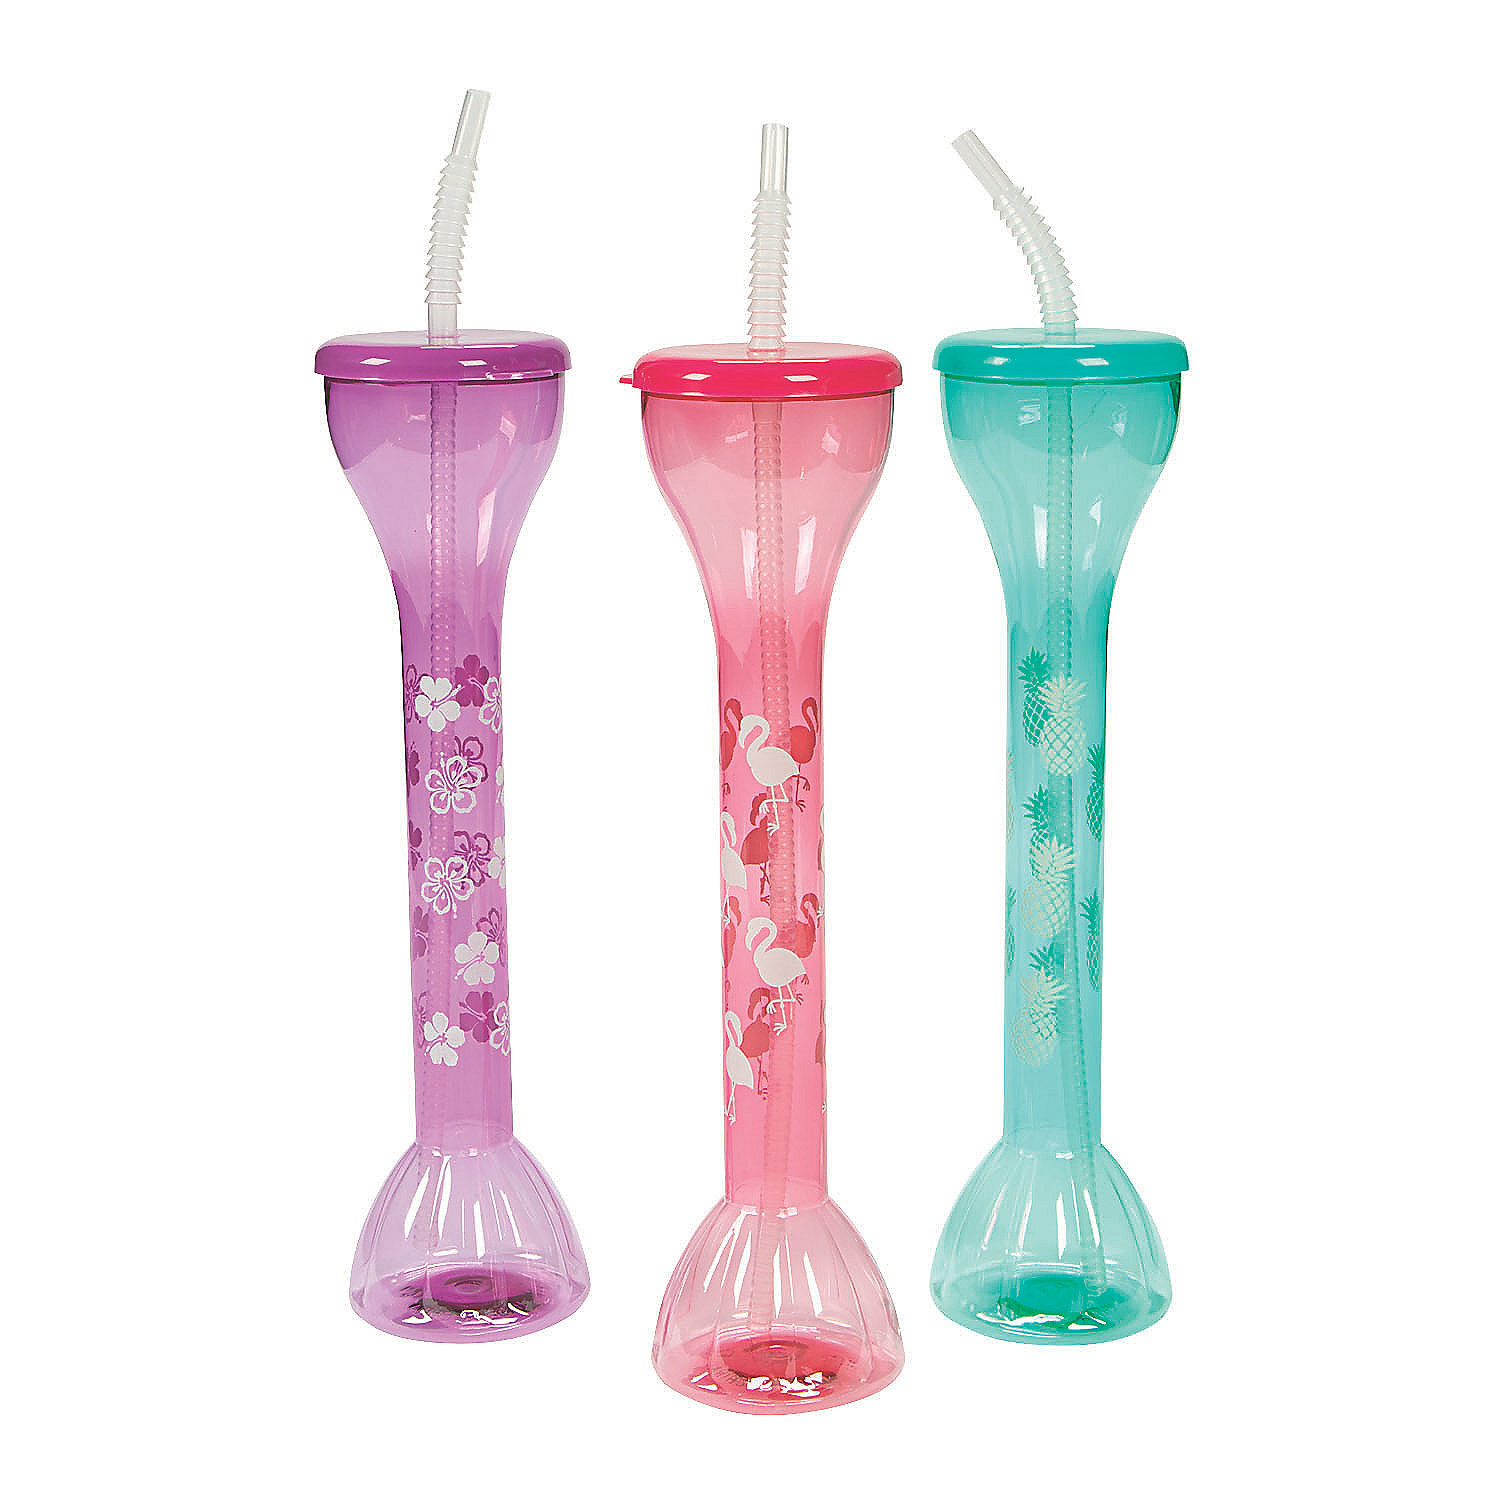 Oriental Trading Company Disposable Plastic Straws & Drink